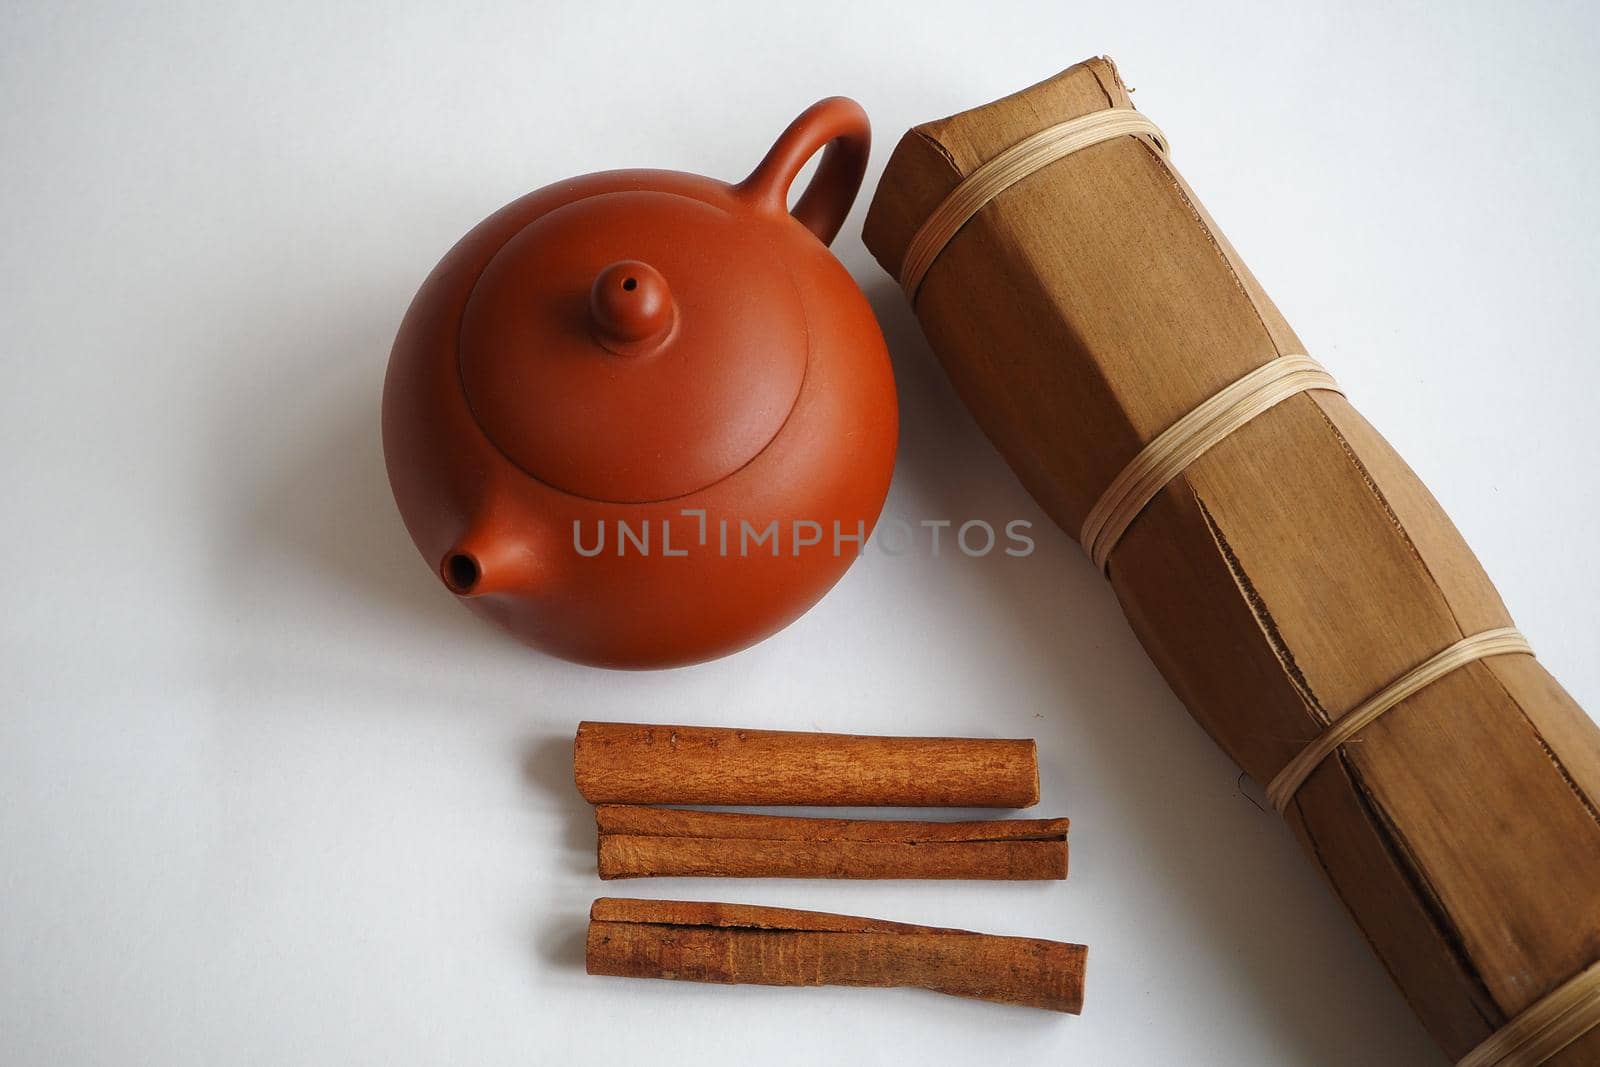 Chinese clay kettle for tea ceremony with herbs and cinnamon sticks. by Olga26